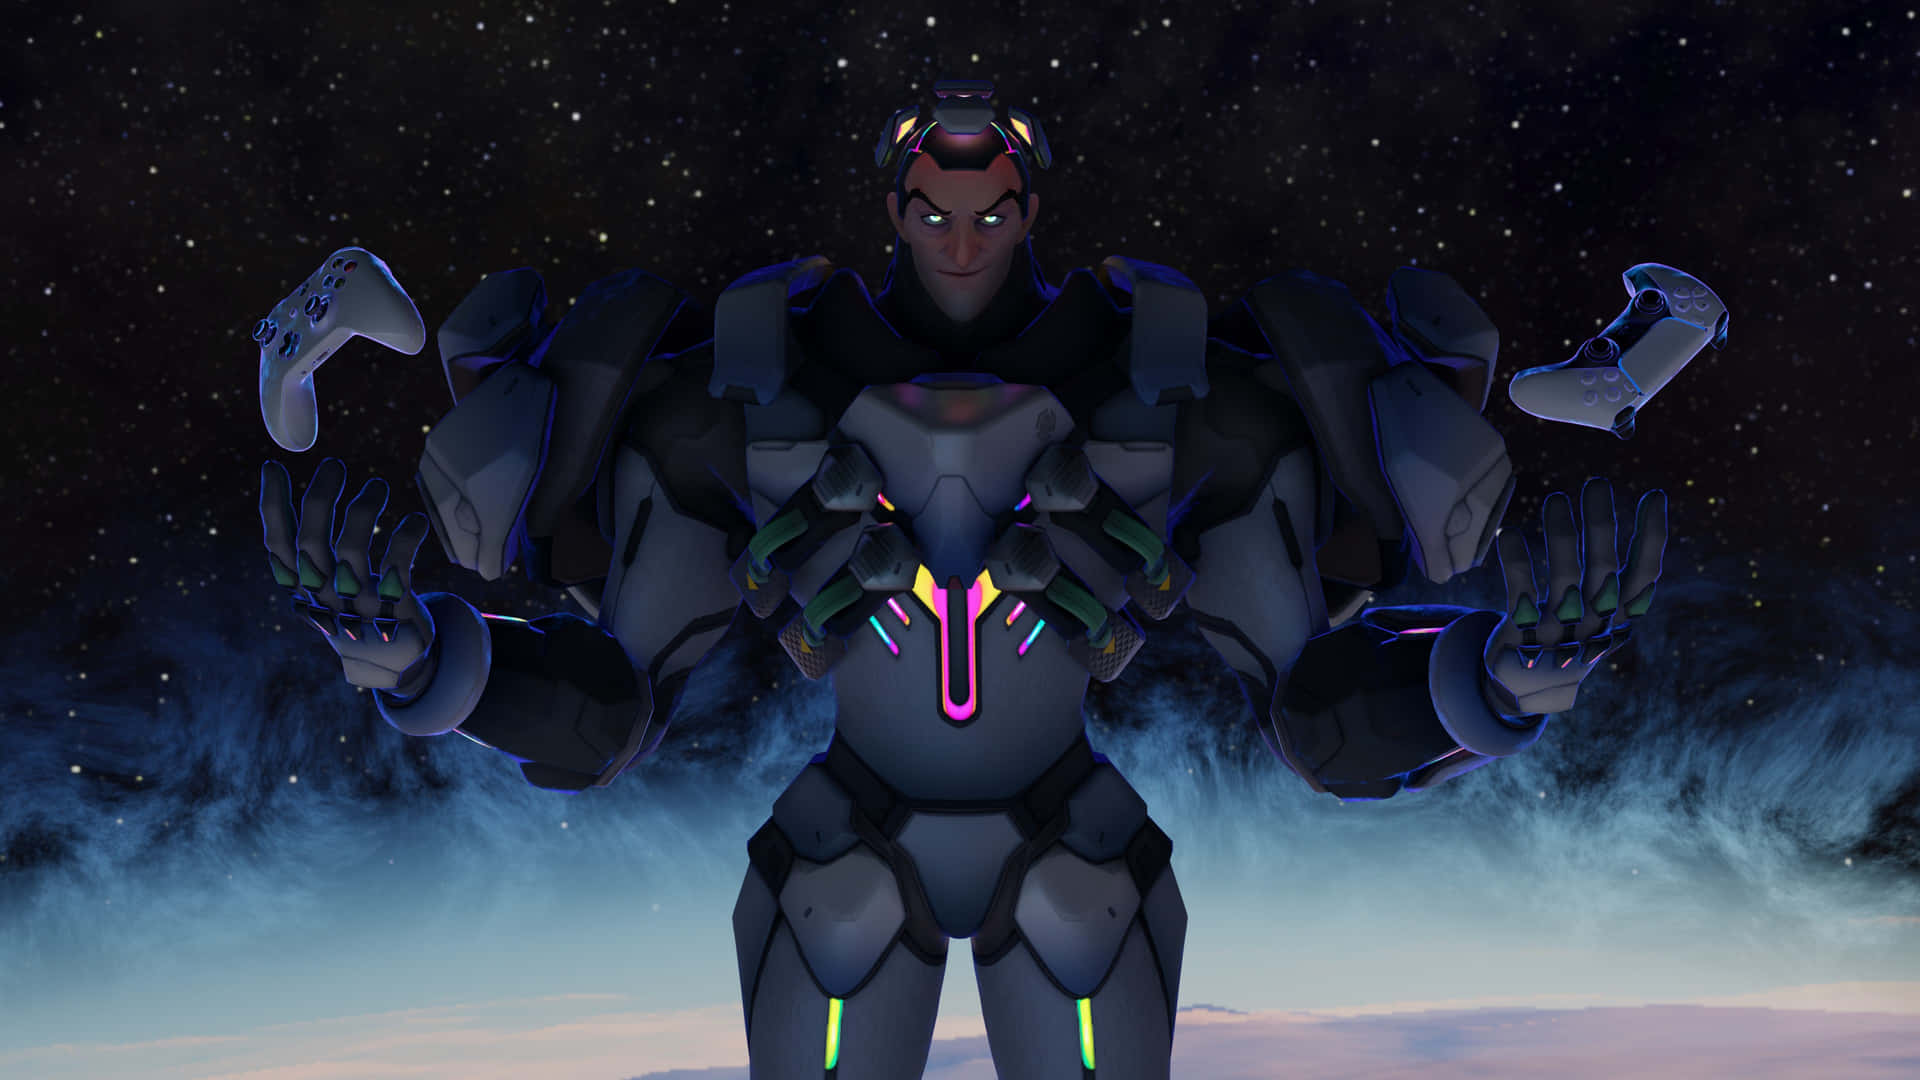 Futuristic Armored Character Night Sky Background